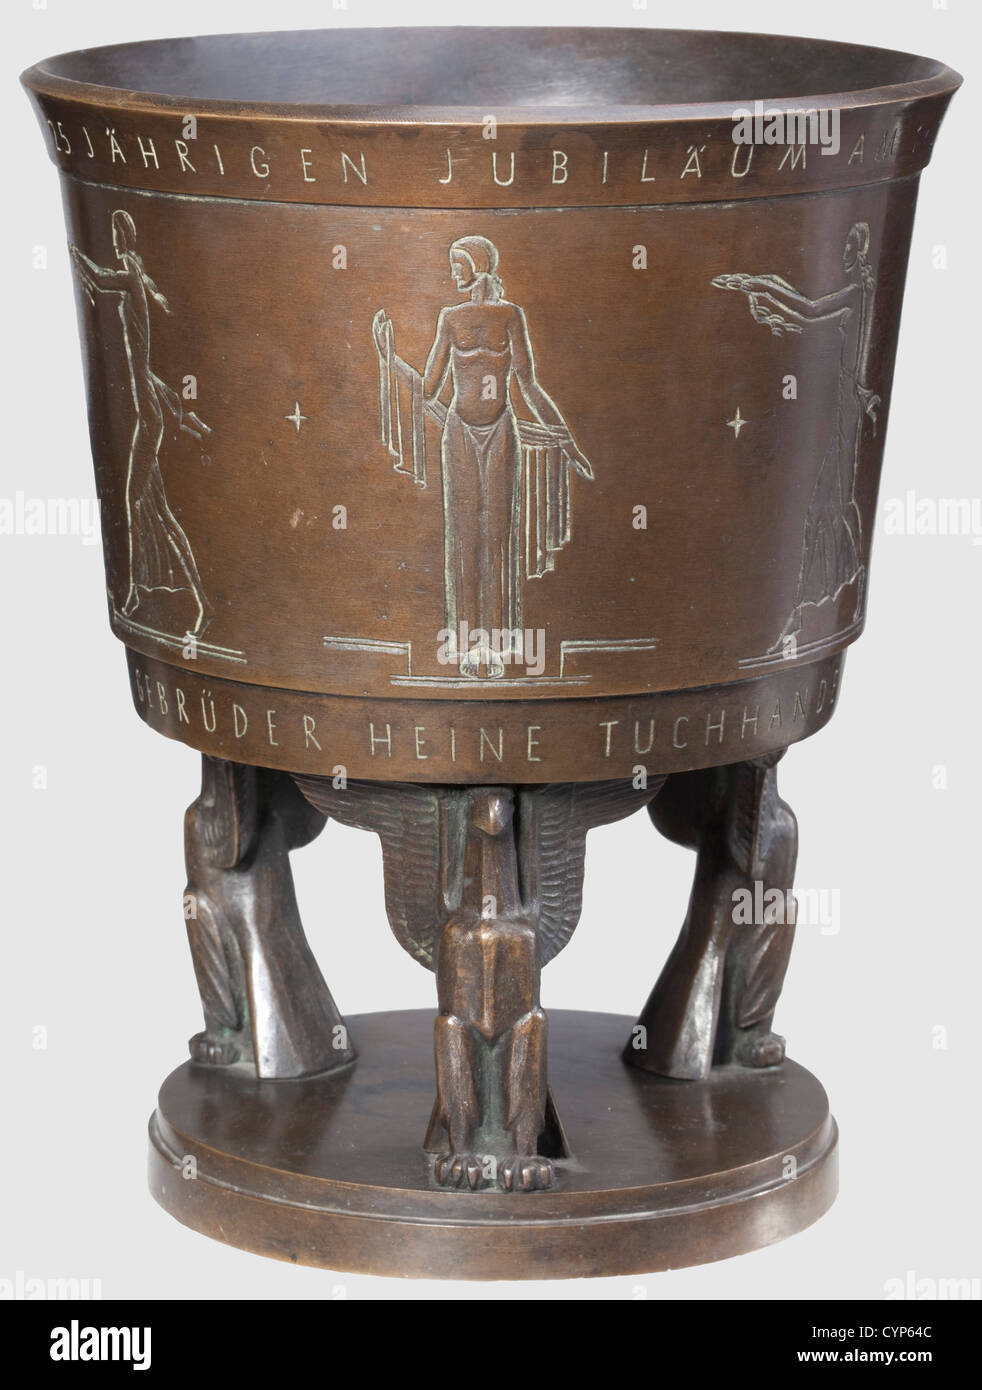 Bruno Eyermann(1888 - 1961)- a presentation bronze 1938,The bell shaped body decorated with antique mythological figures,signed 'Eyermann' and dedication inscription(transl.)'For Wilhelm Schlösser celebrating 25 years with Gebrüder Heine Tuchhandels-AG 1.12.1938 - from his colleagues'. The round base supported by eagle wings. Height 27.6 cm,weight 11.2 kg. Bruno Eyermann,sculptor,engraver and painter,studied at the Leipzig Academy,thereafter ibid. teacher in the department of engraving and chiselling,created amongst others the WW1 memorial in Altenb,Additional-Rights-Clearences-Not Available Stock Photo